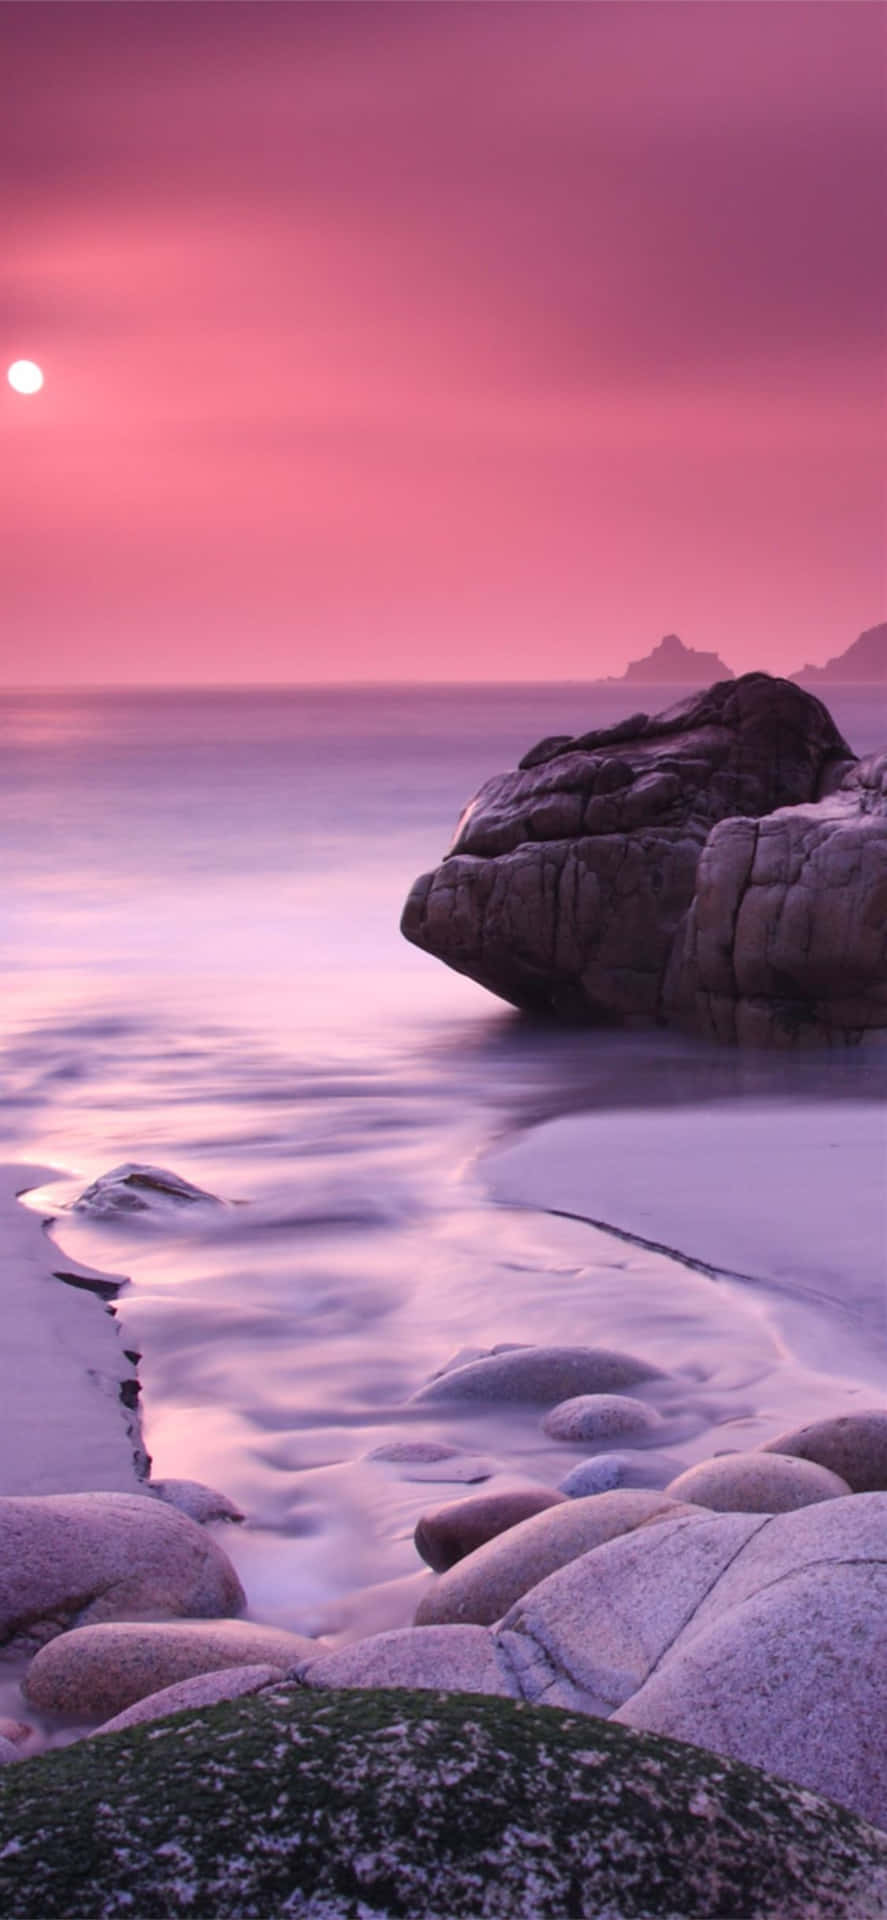 Enjoy The Shimmering Blues And Pinks Of A Peaceful Evening